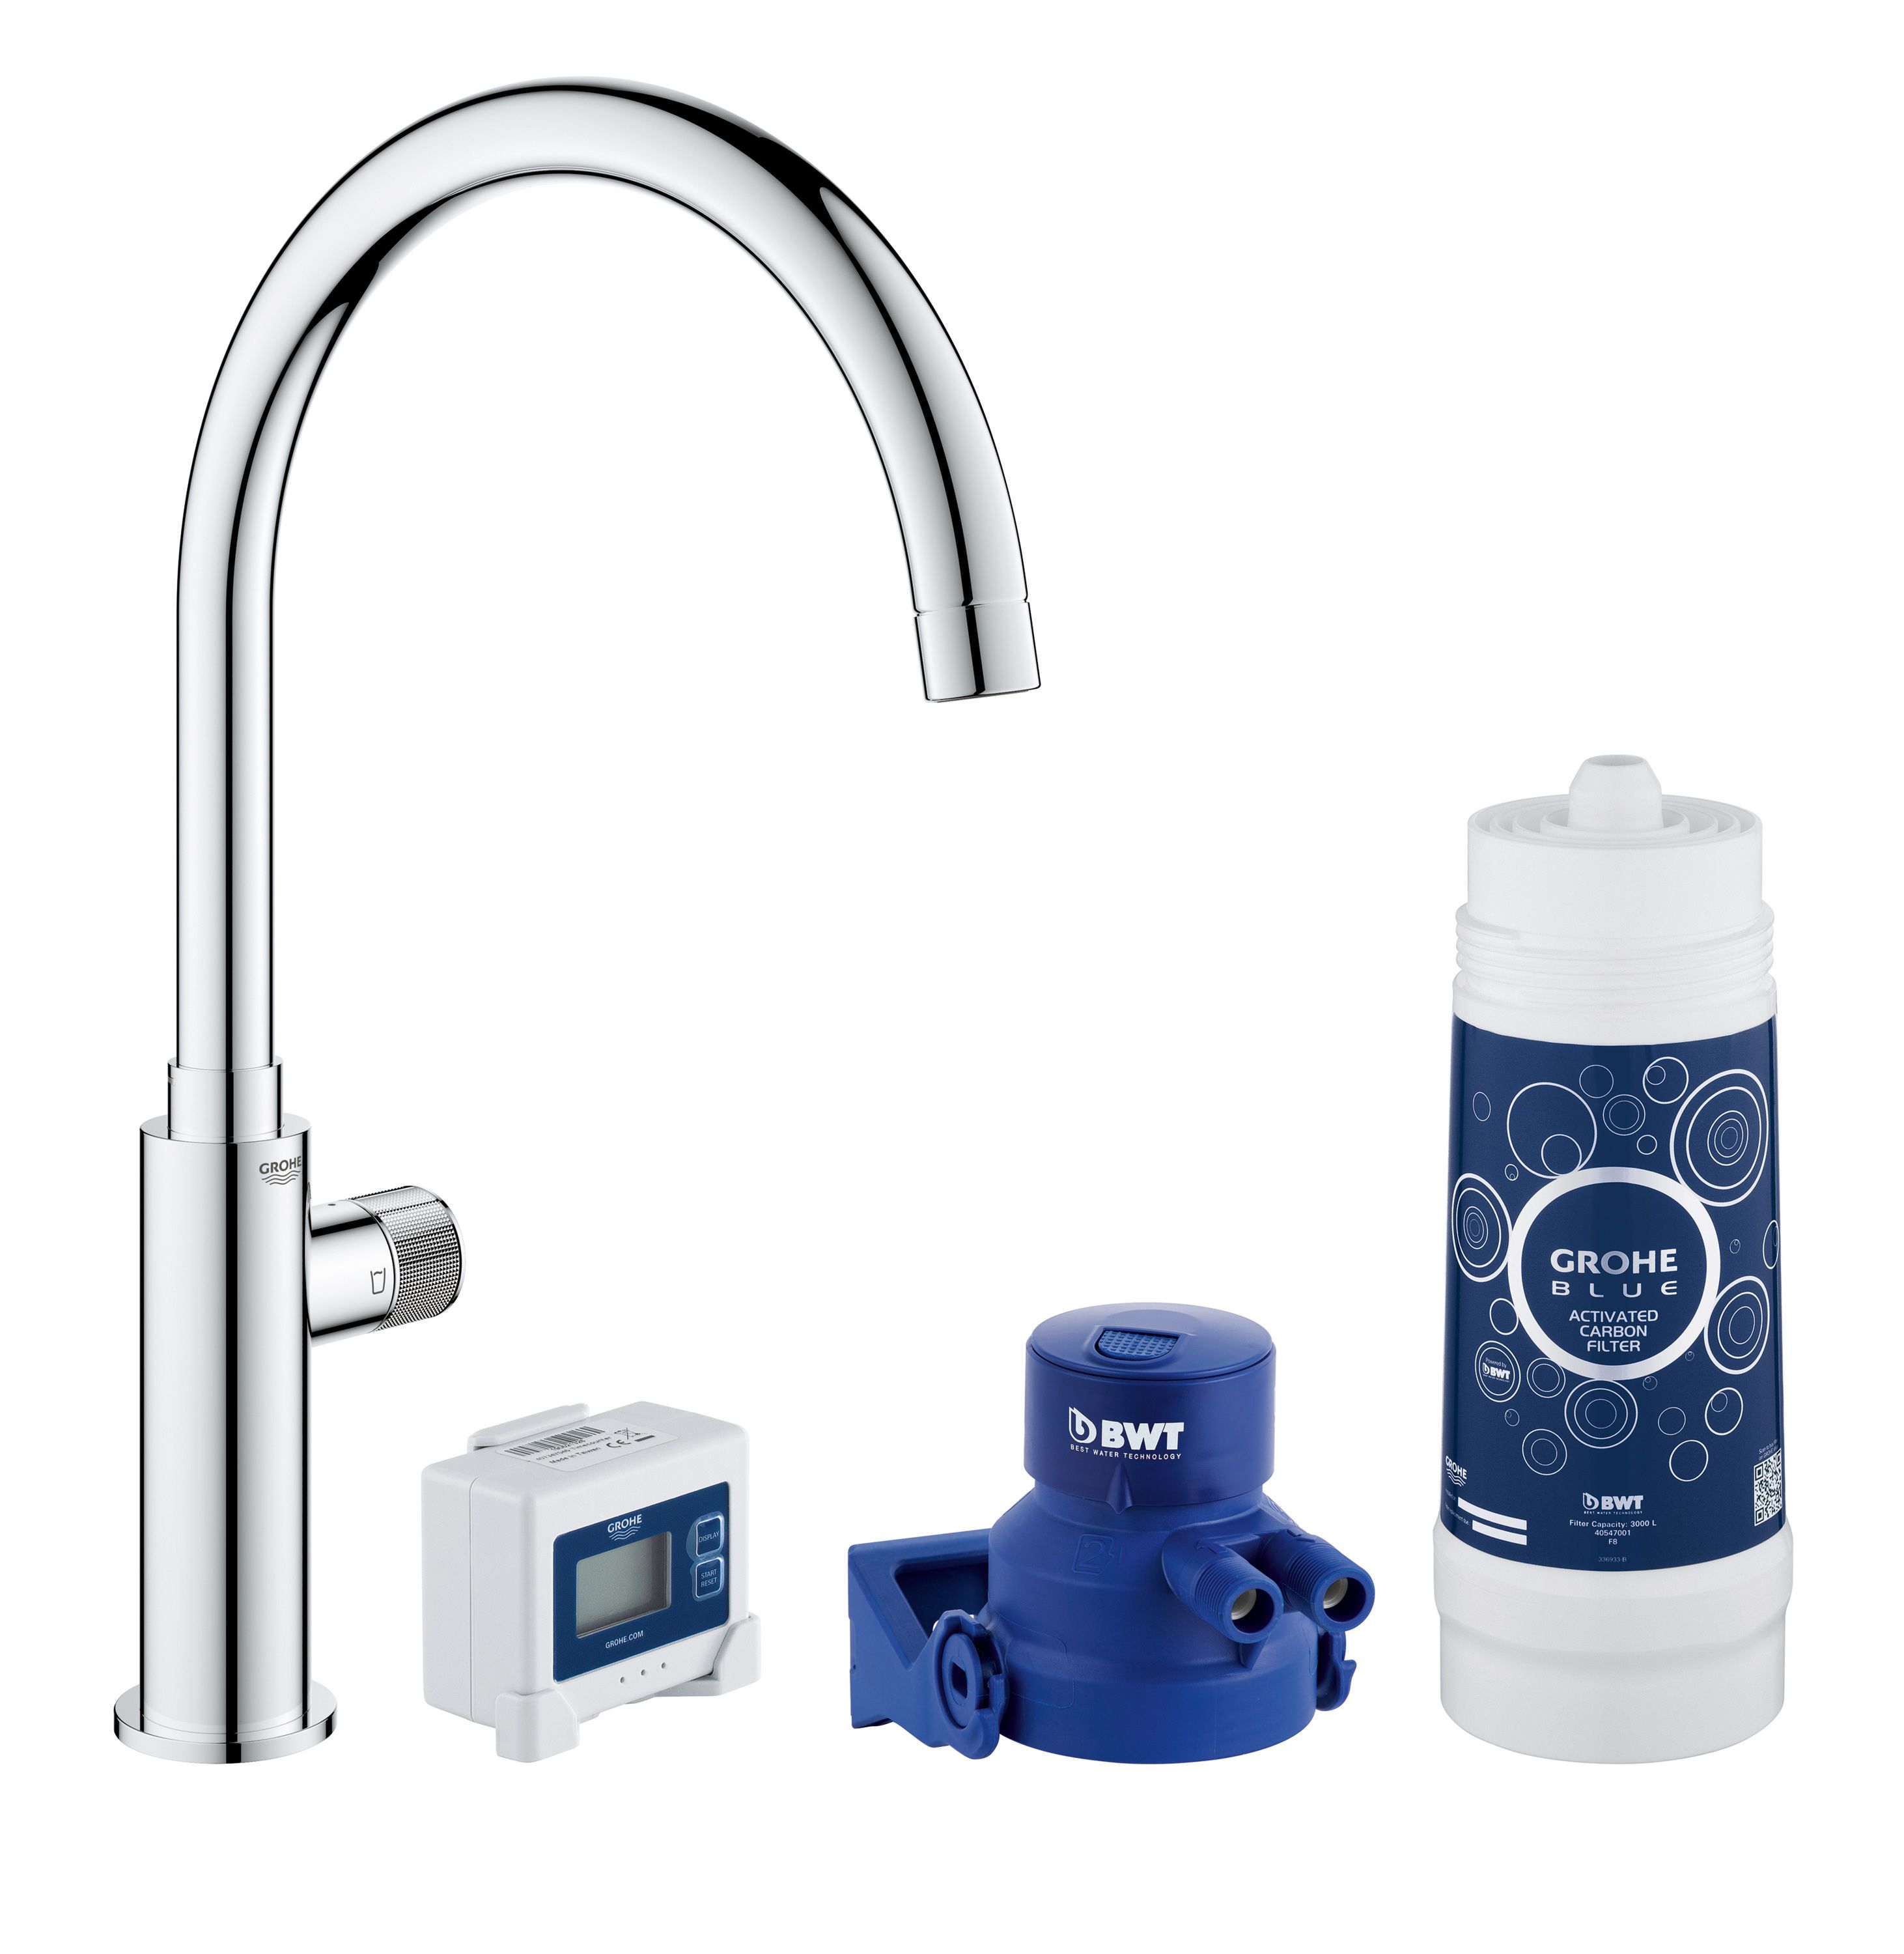 Grohe Blue effect Filter tap at B&Q